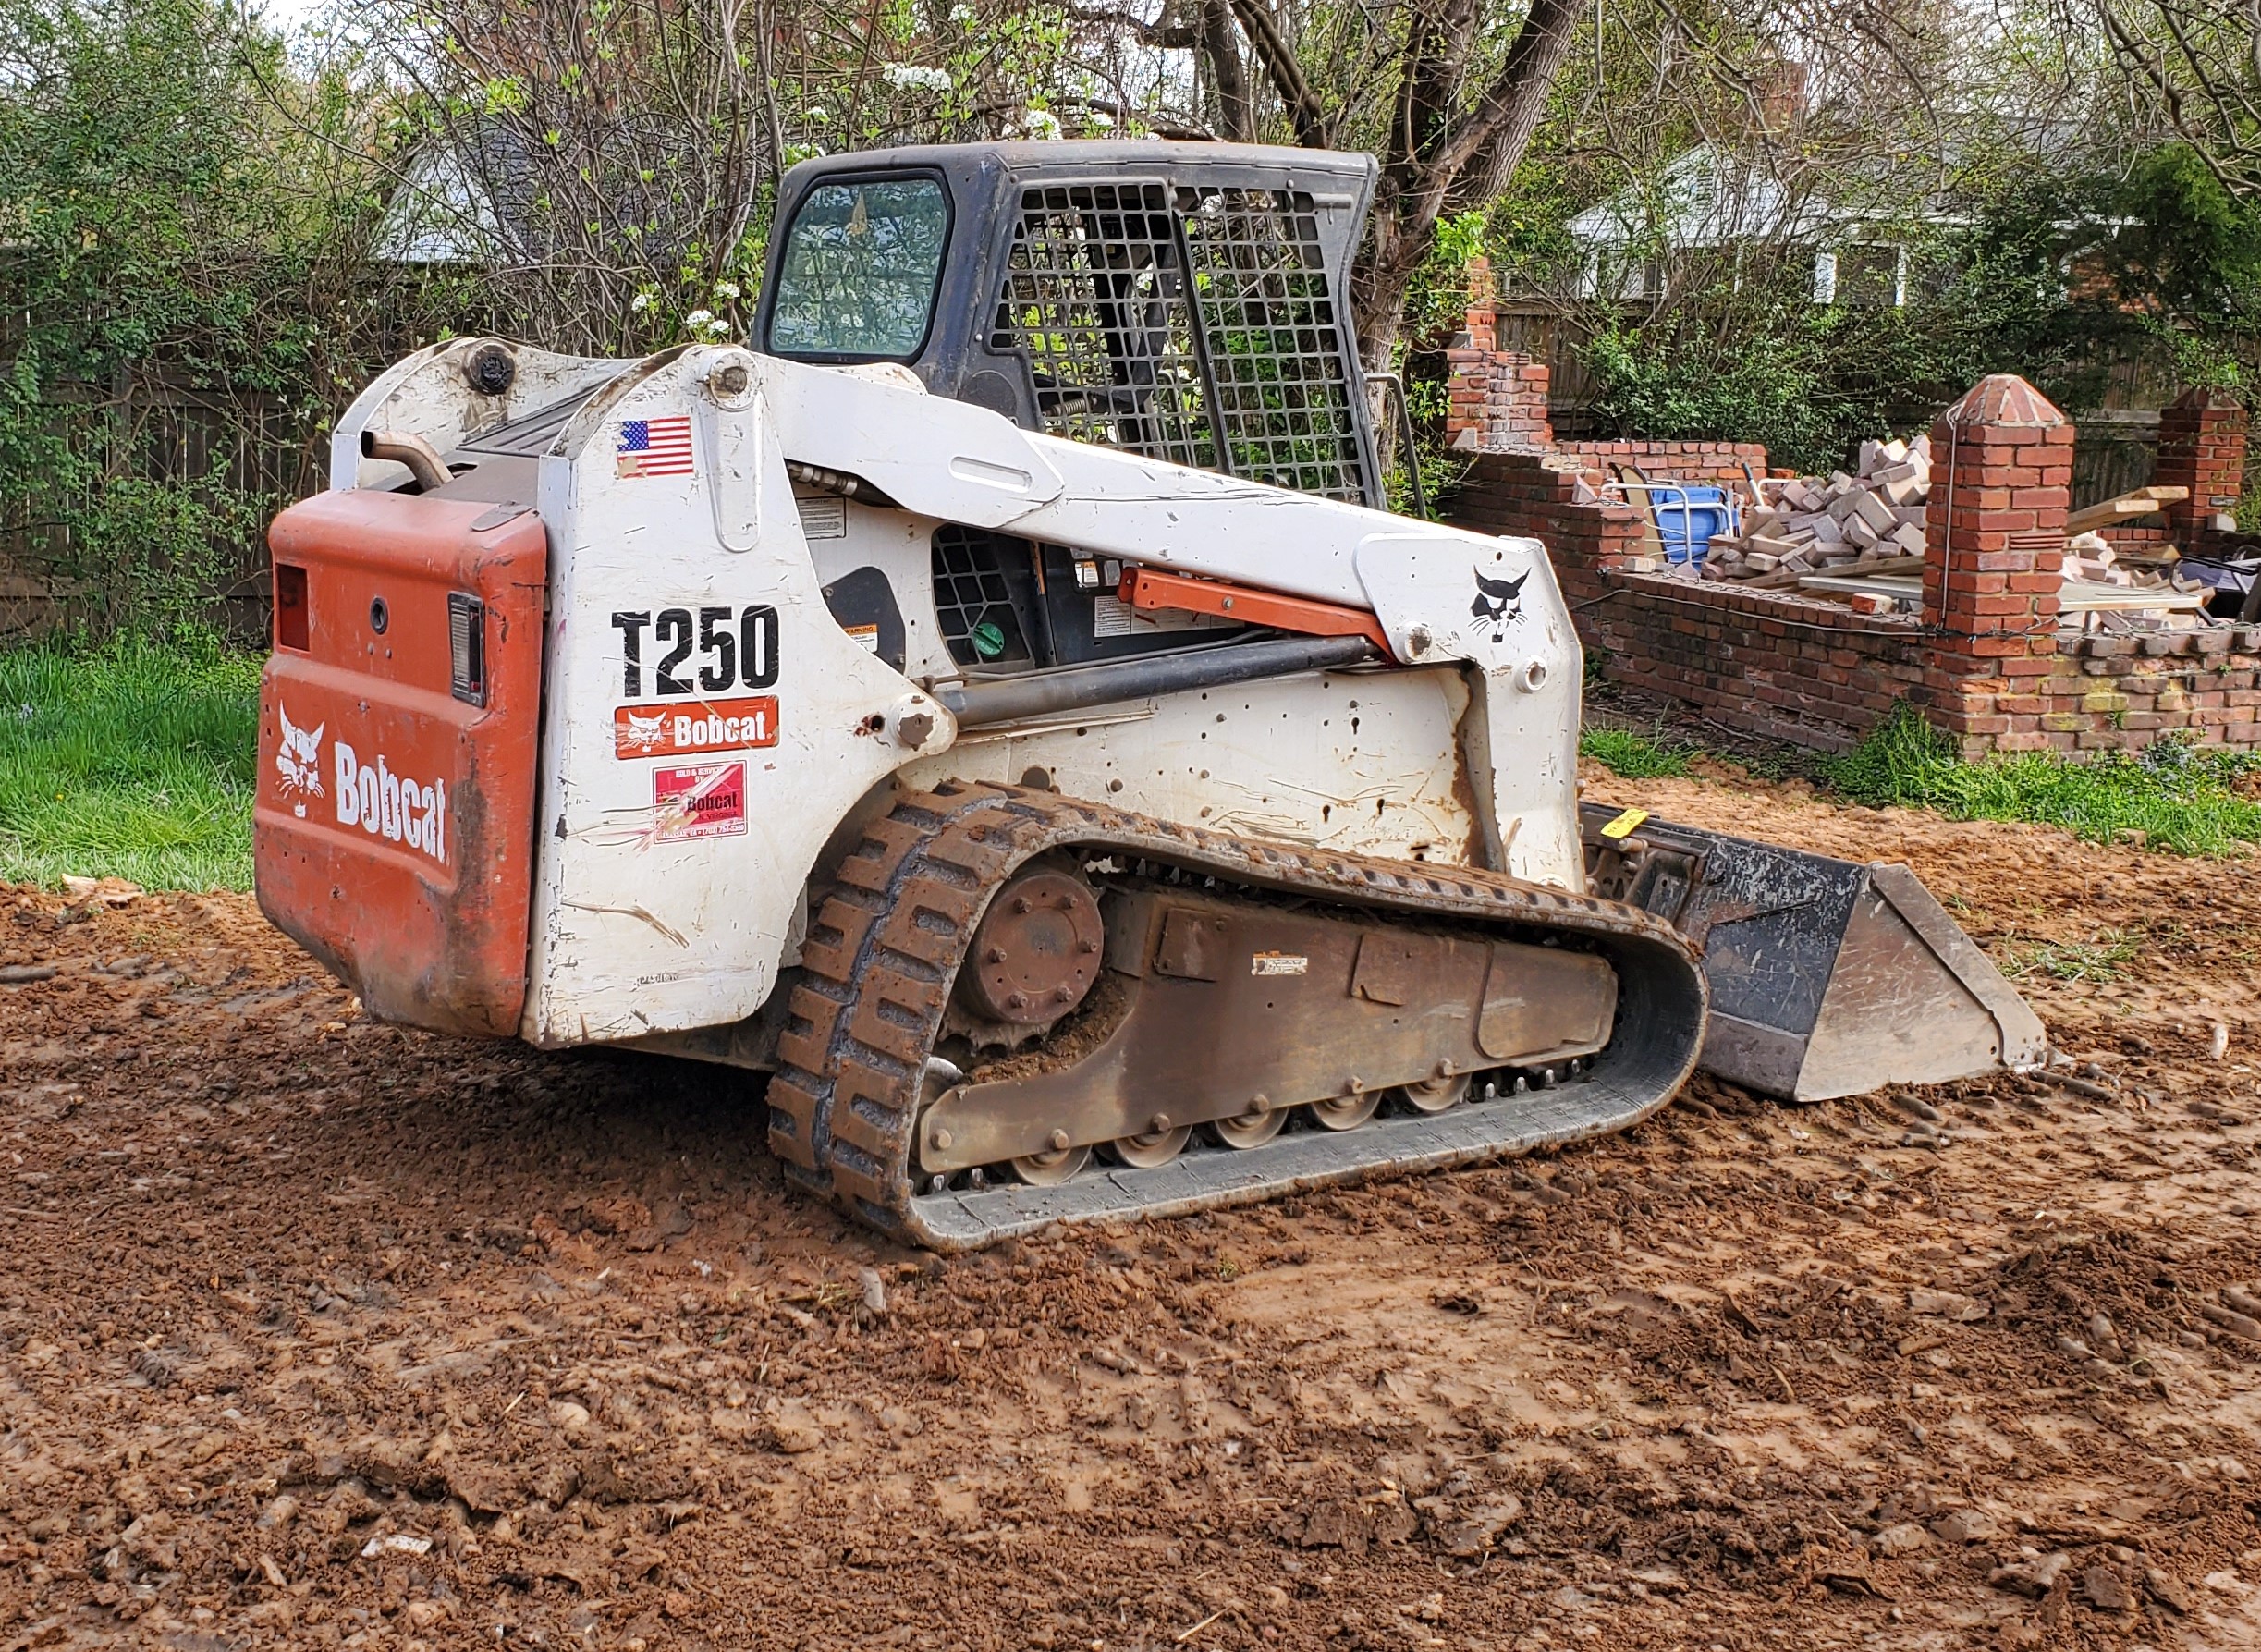 the dirt connections bobcat rental near me can load full size dump trucks